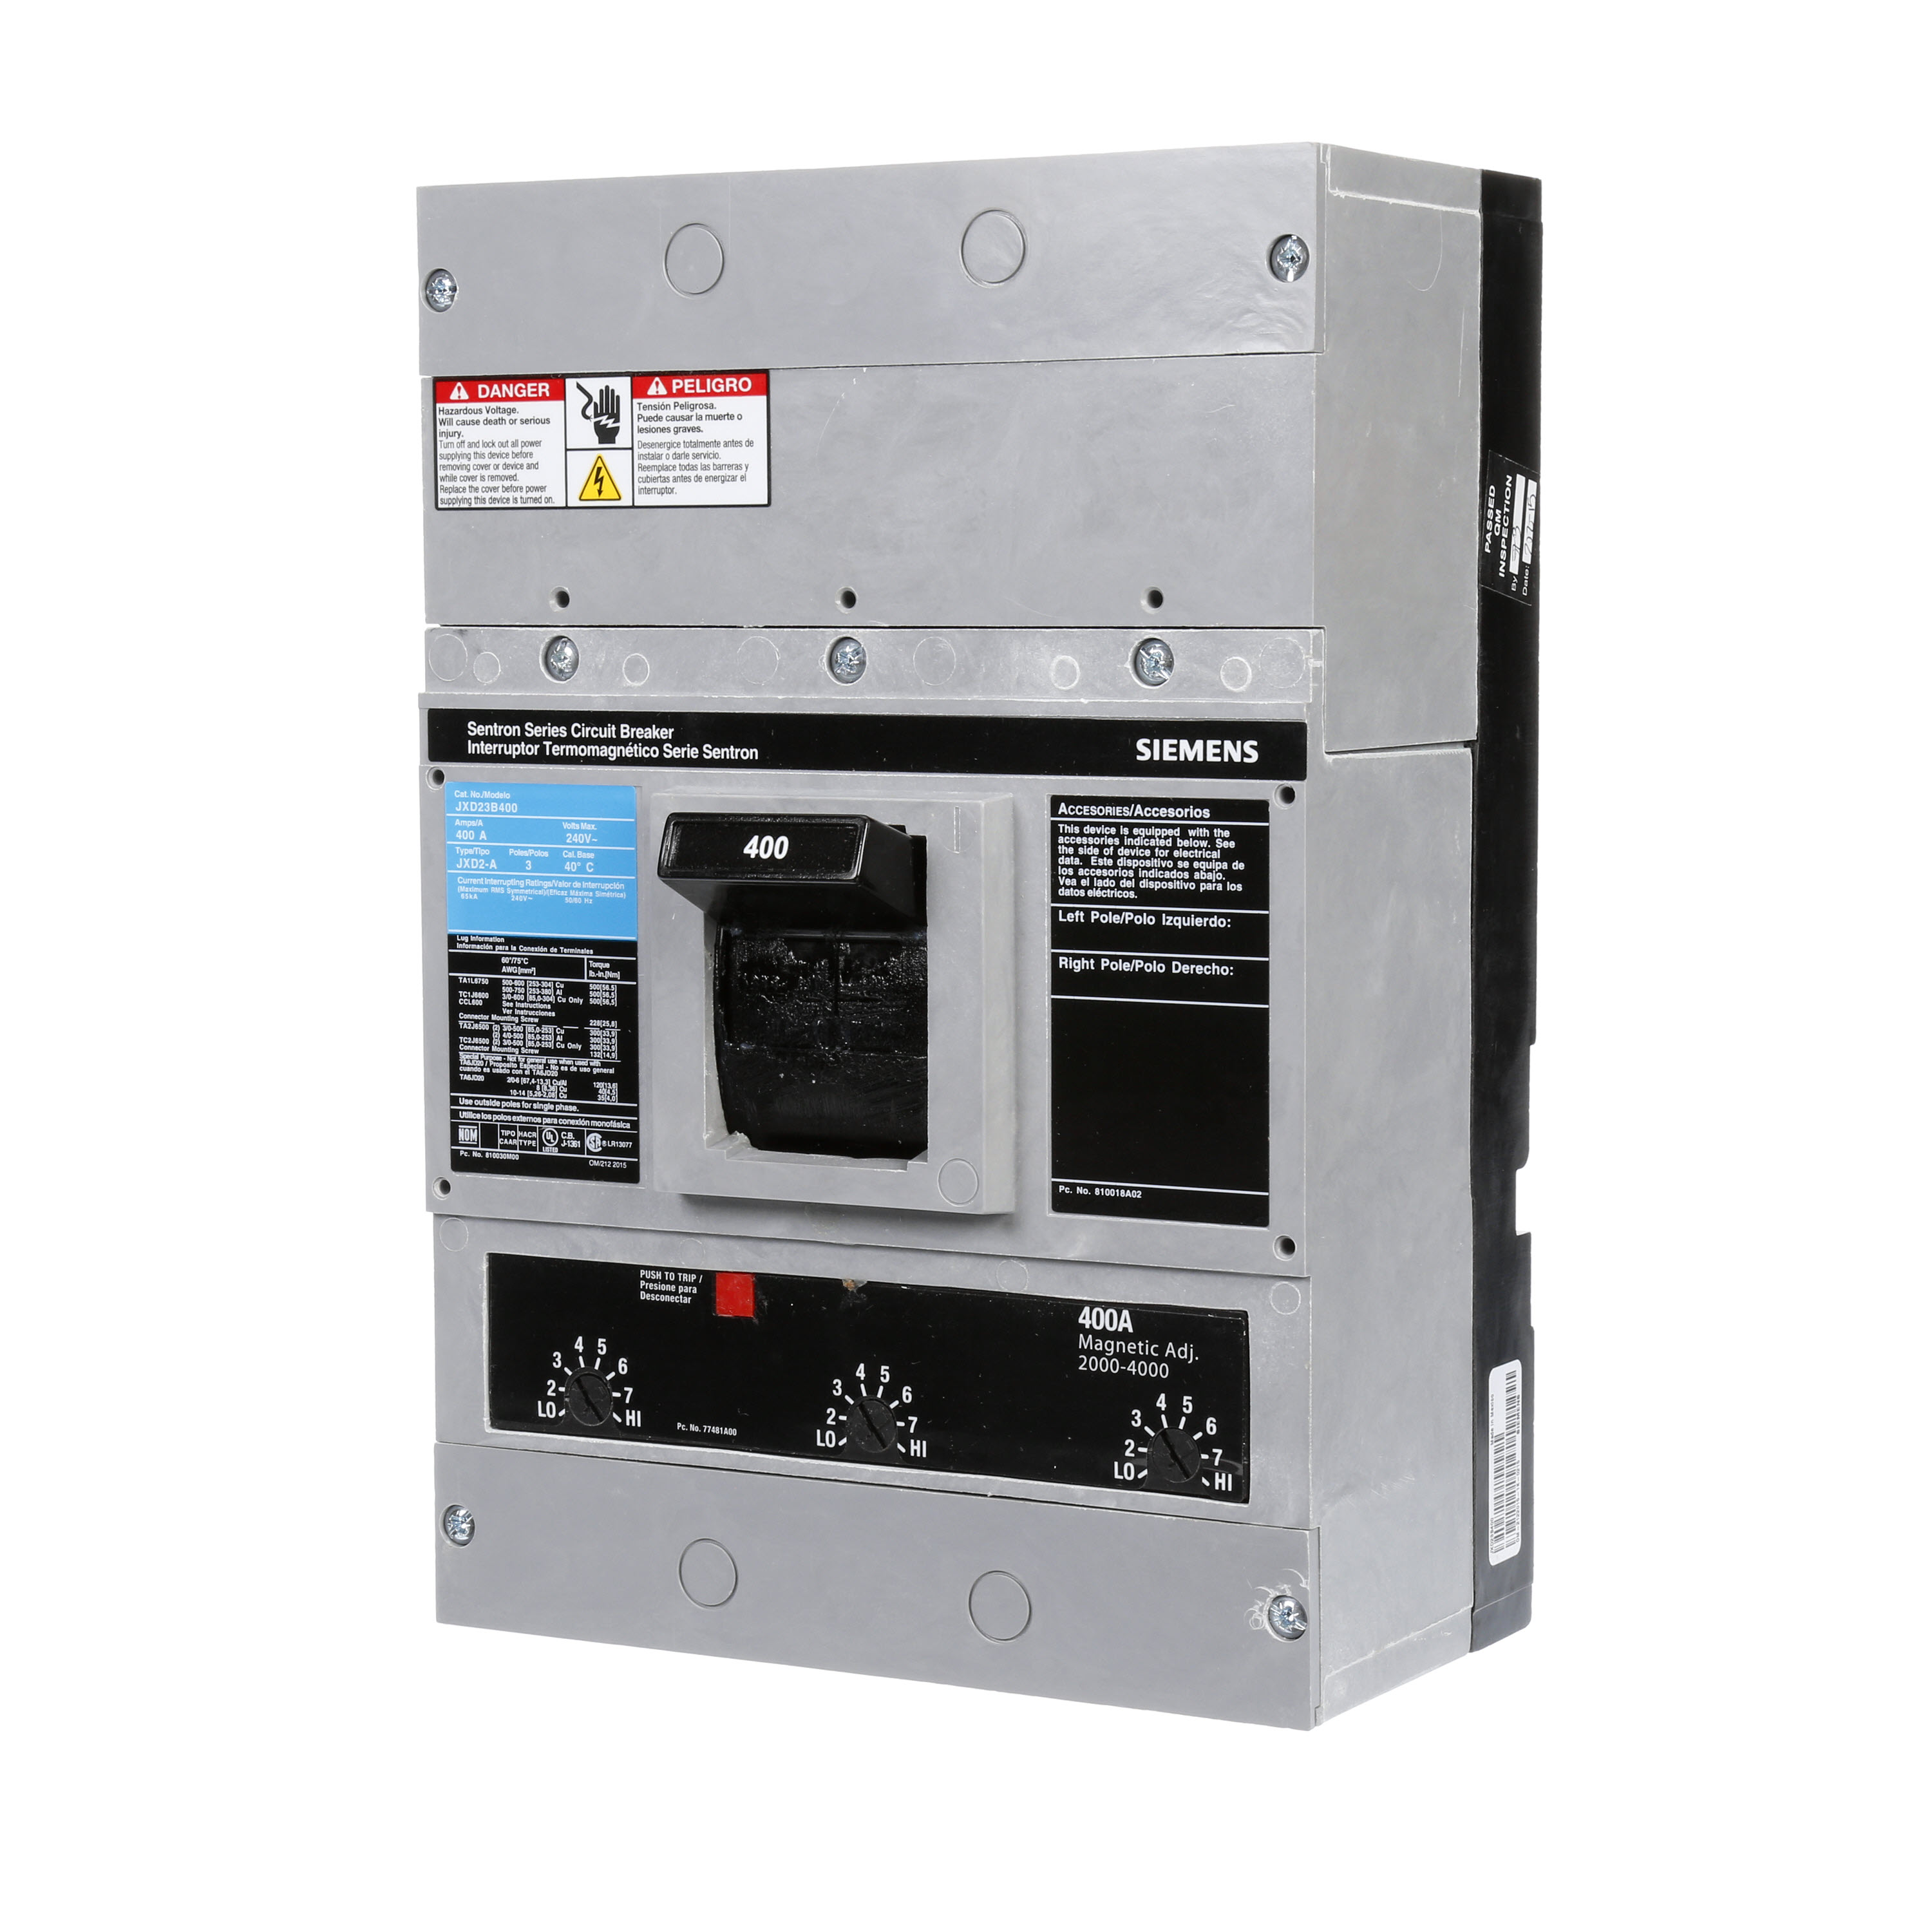 SIEMENS LOW VOLTAGE SENTRON MOLDED CASE CIRCUIT BREAKER WITH THERMAL - MAGNETICTRIP UNIT. ASSEMBLED STANDARD 40 DEG C BREAKER JD FRAME WITH STANDARD BREAKING CAPACITY. 400A 3-POLE (65KAIC AT 240V). NON-INTERCHANGEABLE TRIP UNIT. SPECIAL FEATURES NO LUGS INSTALLED. DIMENSIONS (W x H x D) IN 7.50 x 11.0 x 4.00.